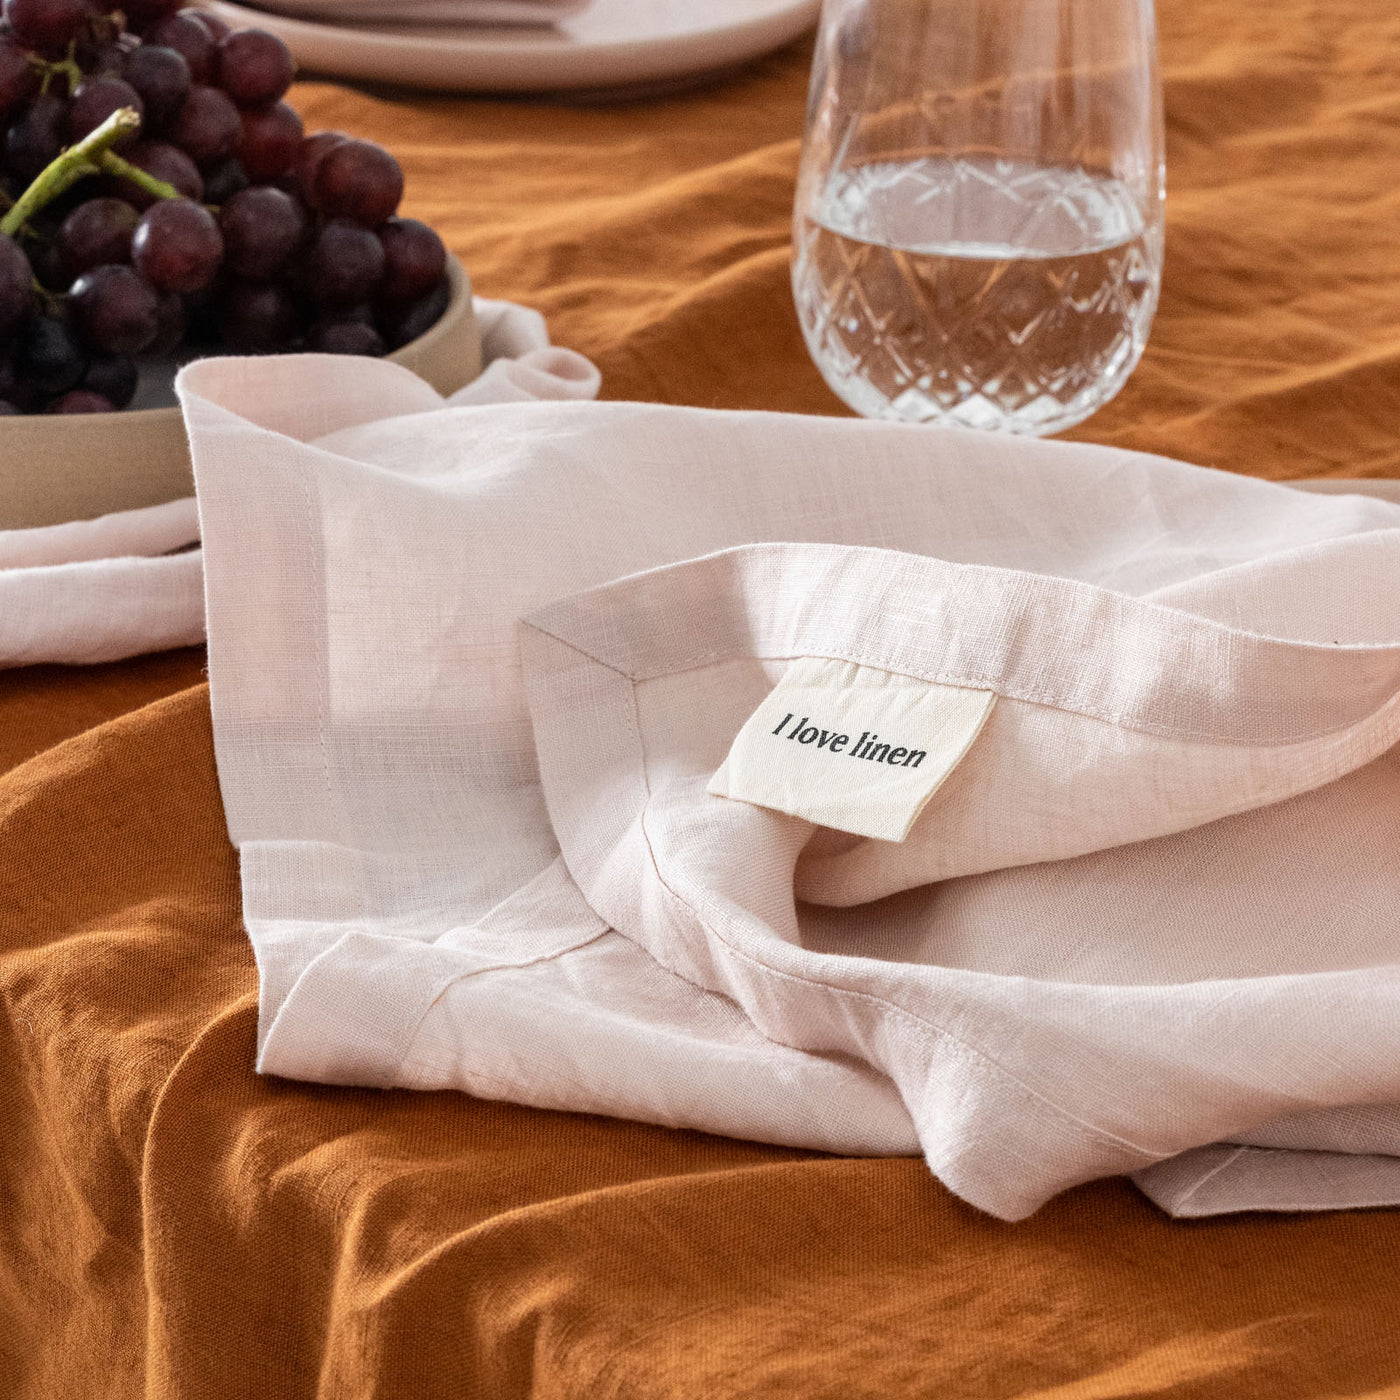 French Flax Linen Napkins (Set Of 4) in Blush